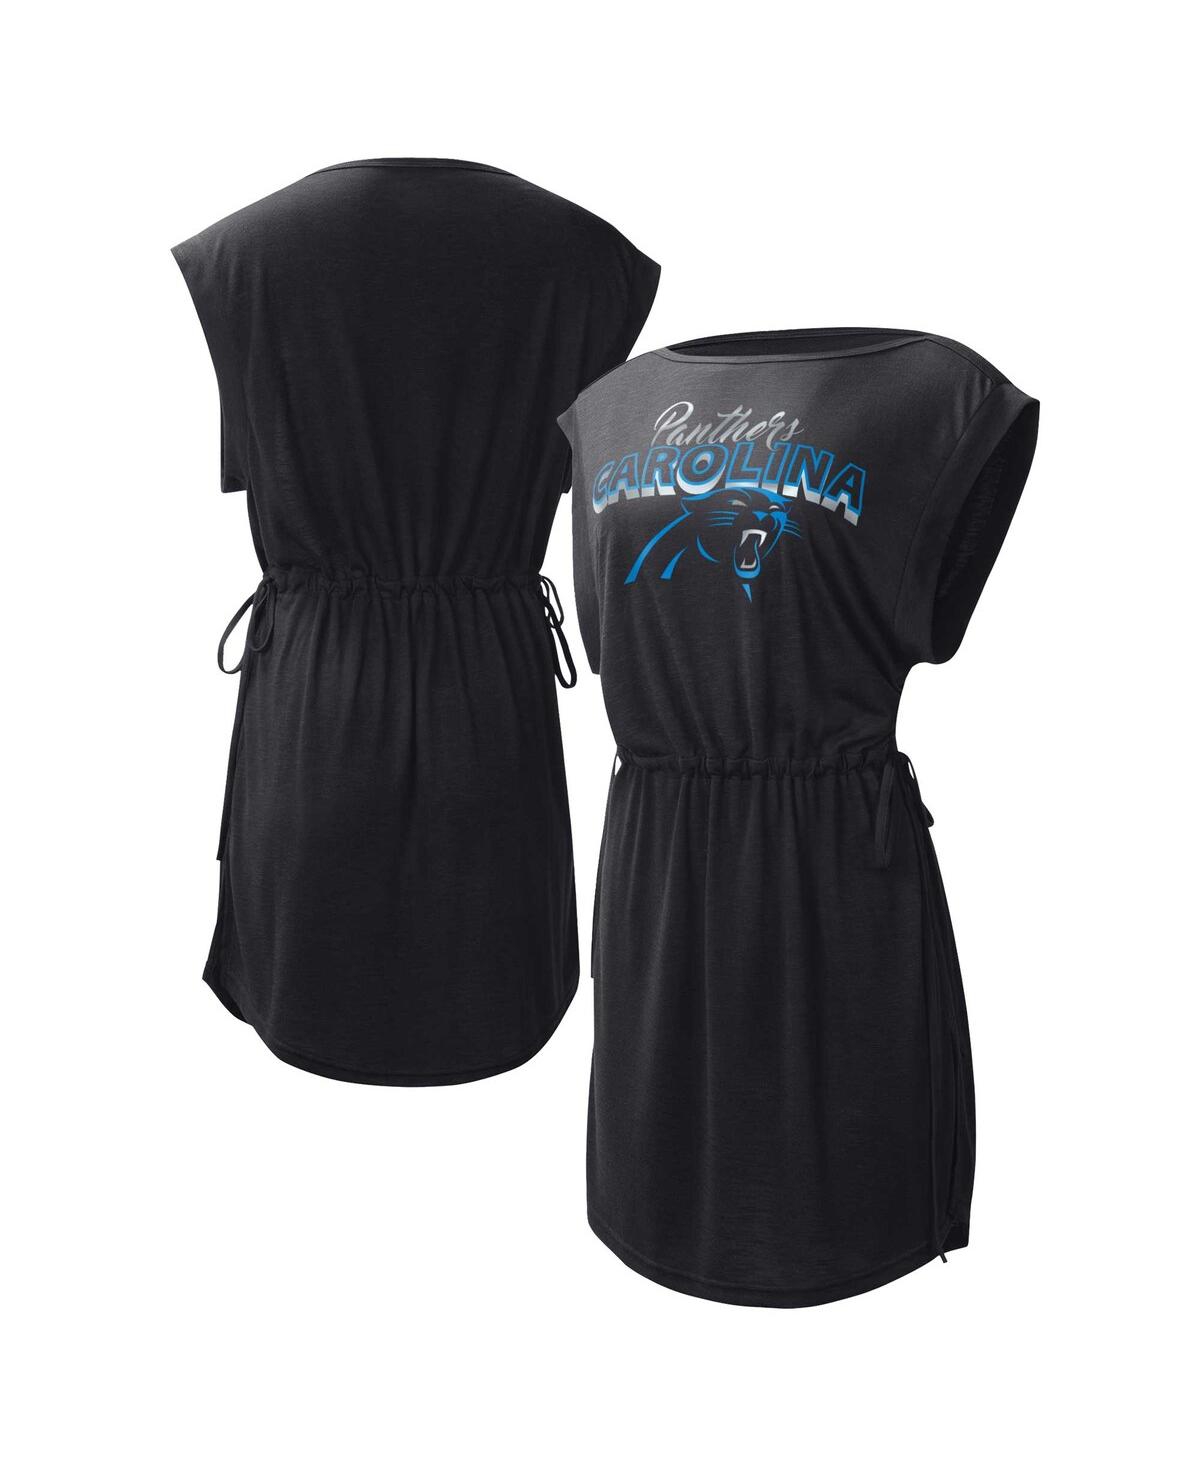 G-III 4HER BY CARL BANKS WOMEN'S G-III 4HER BY CARL BANKS BLACK CAROLINA PANTHERS G.O.A.T. SWIMSUIT COVER-UP